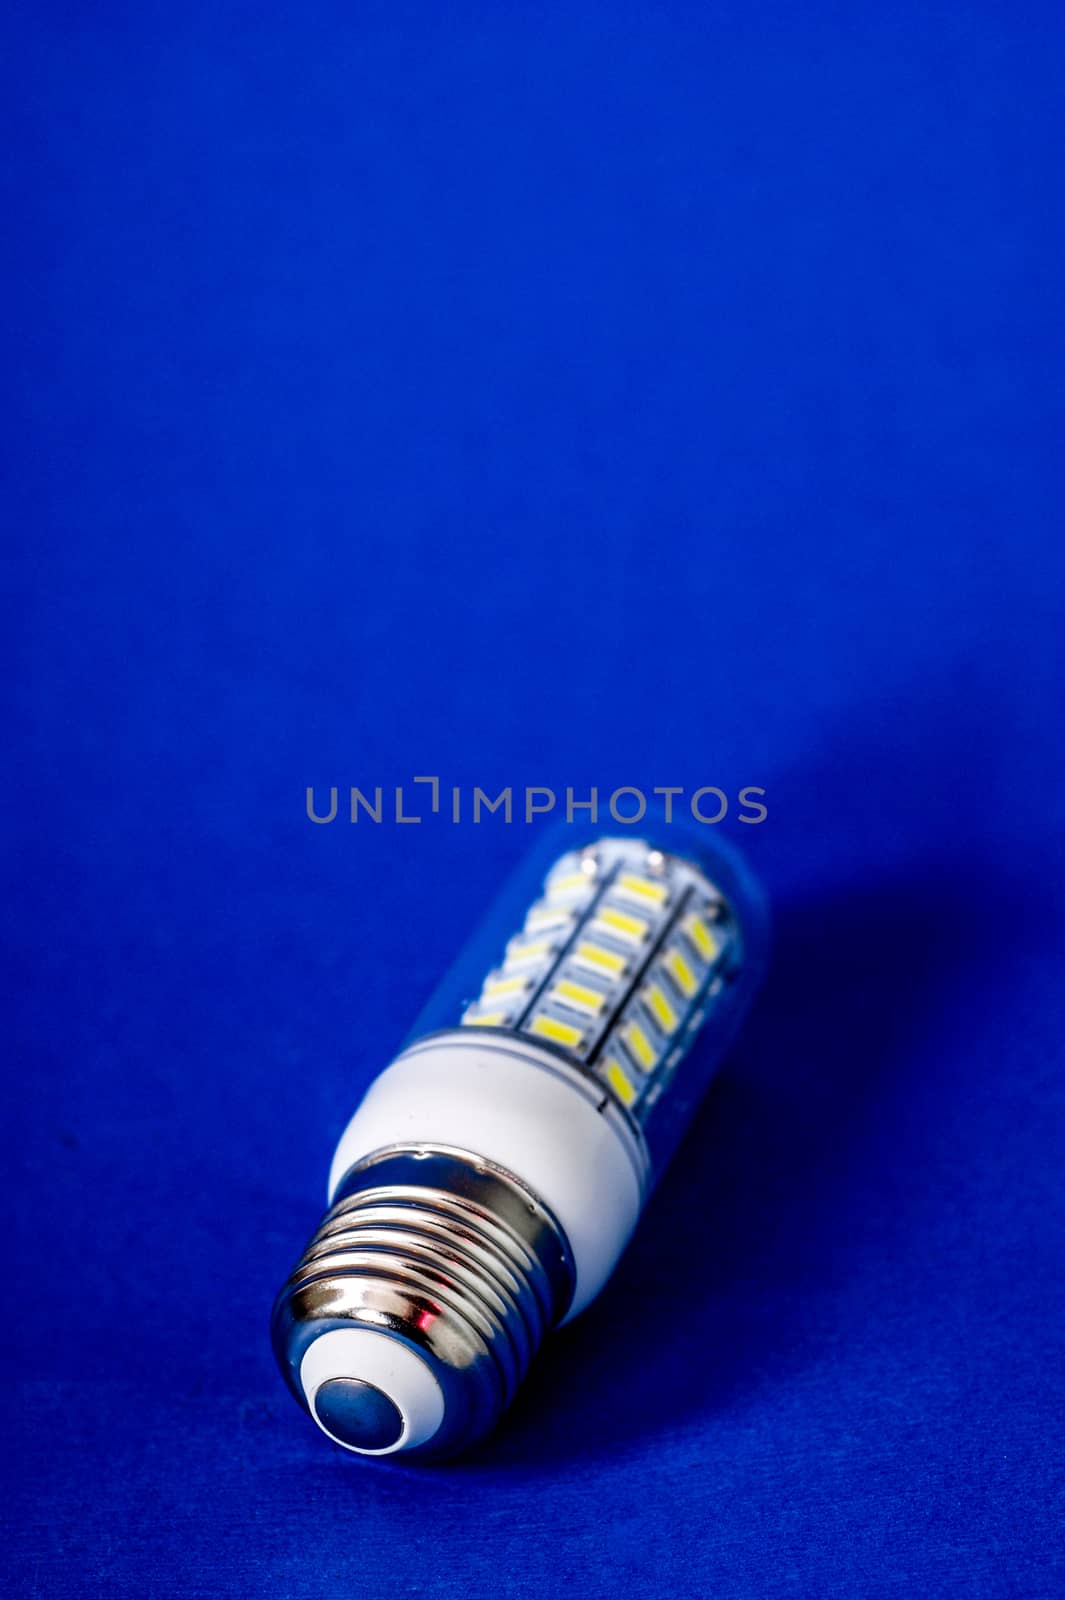  Picture of a  Energy saving LED light bulb 